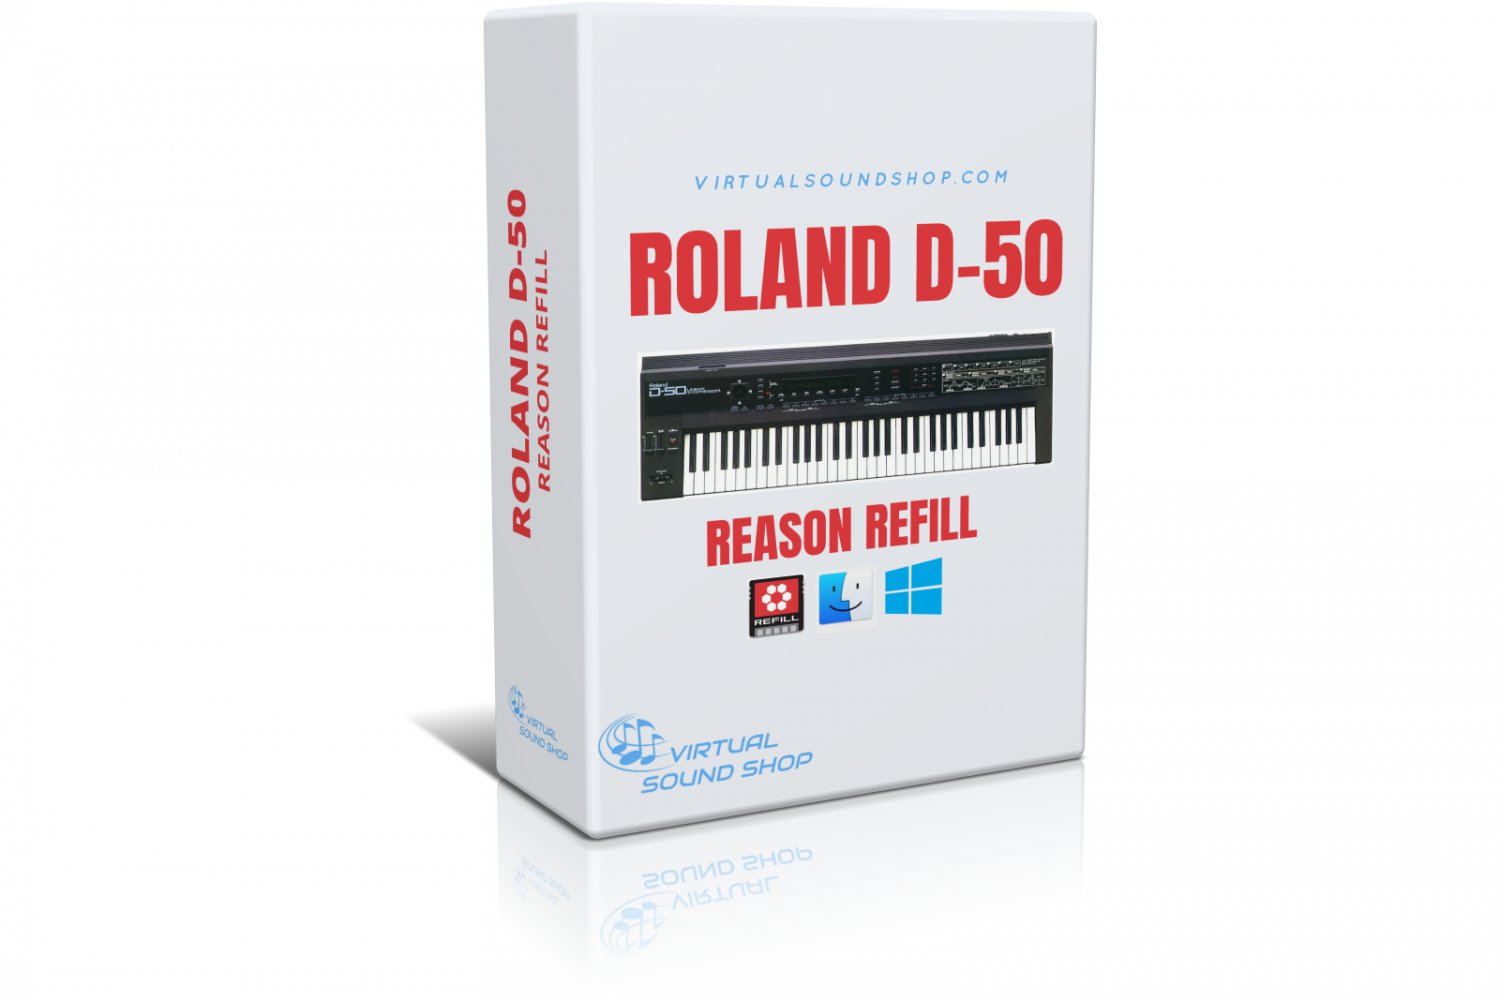 Roland D-50 Reason Refill Expansion Bank